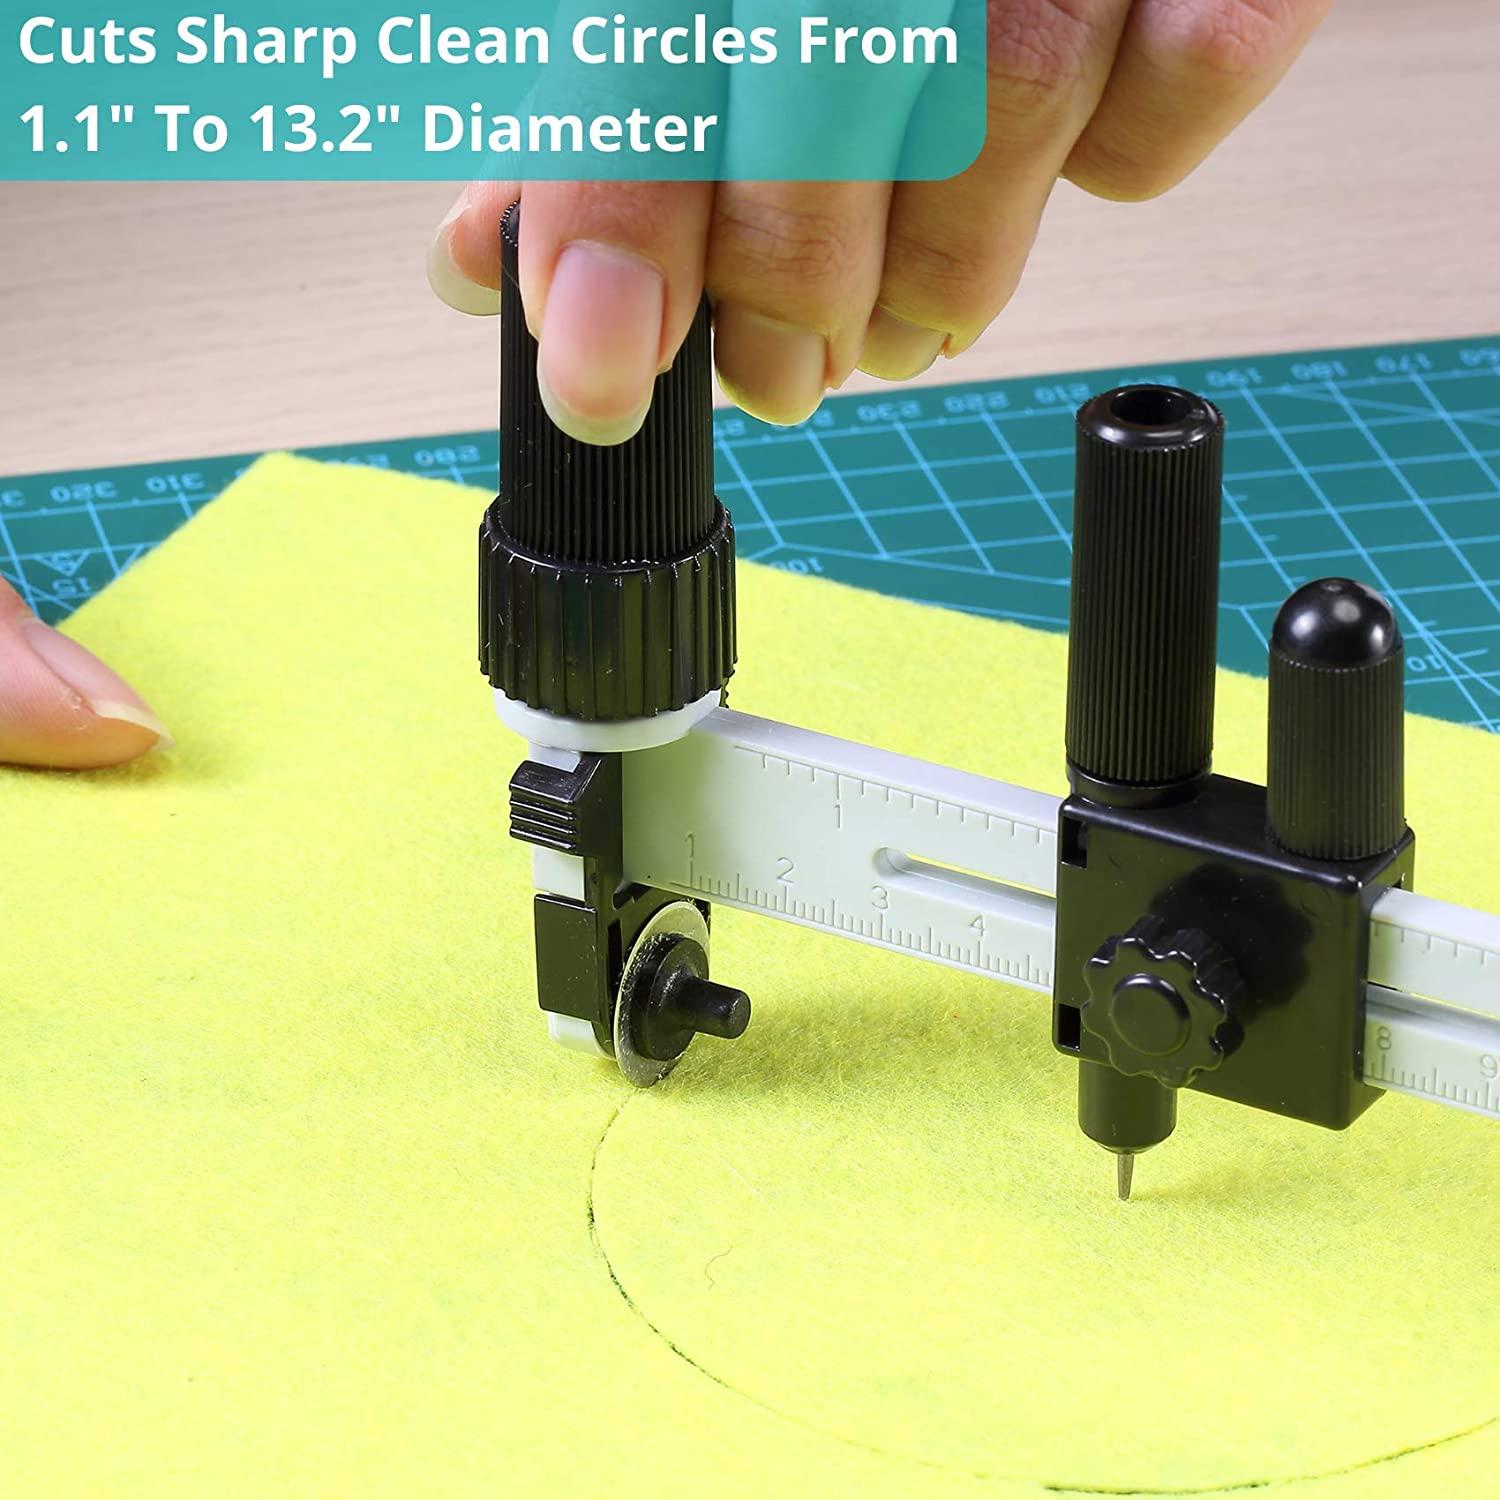 Compass Circle Cutter, Fabric Circle Cutter for Paper Crafts, Circular  Cutter, Cutting Compass, Circle Cutter , Circle Cutting Tool 